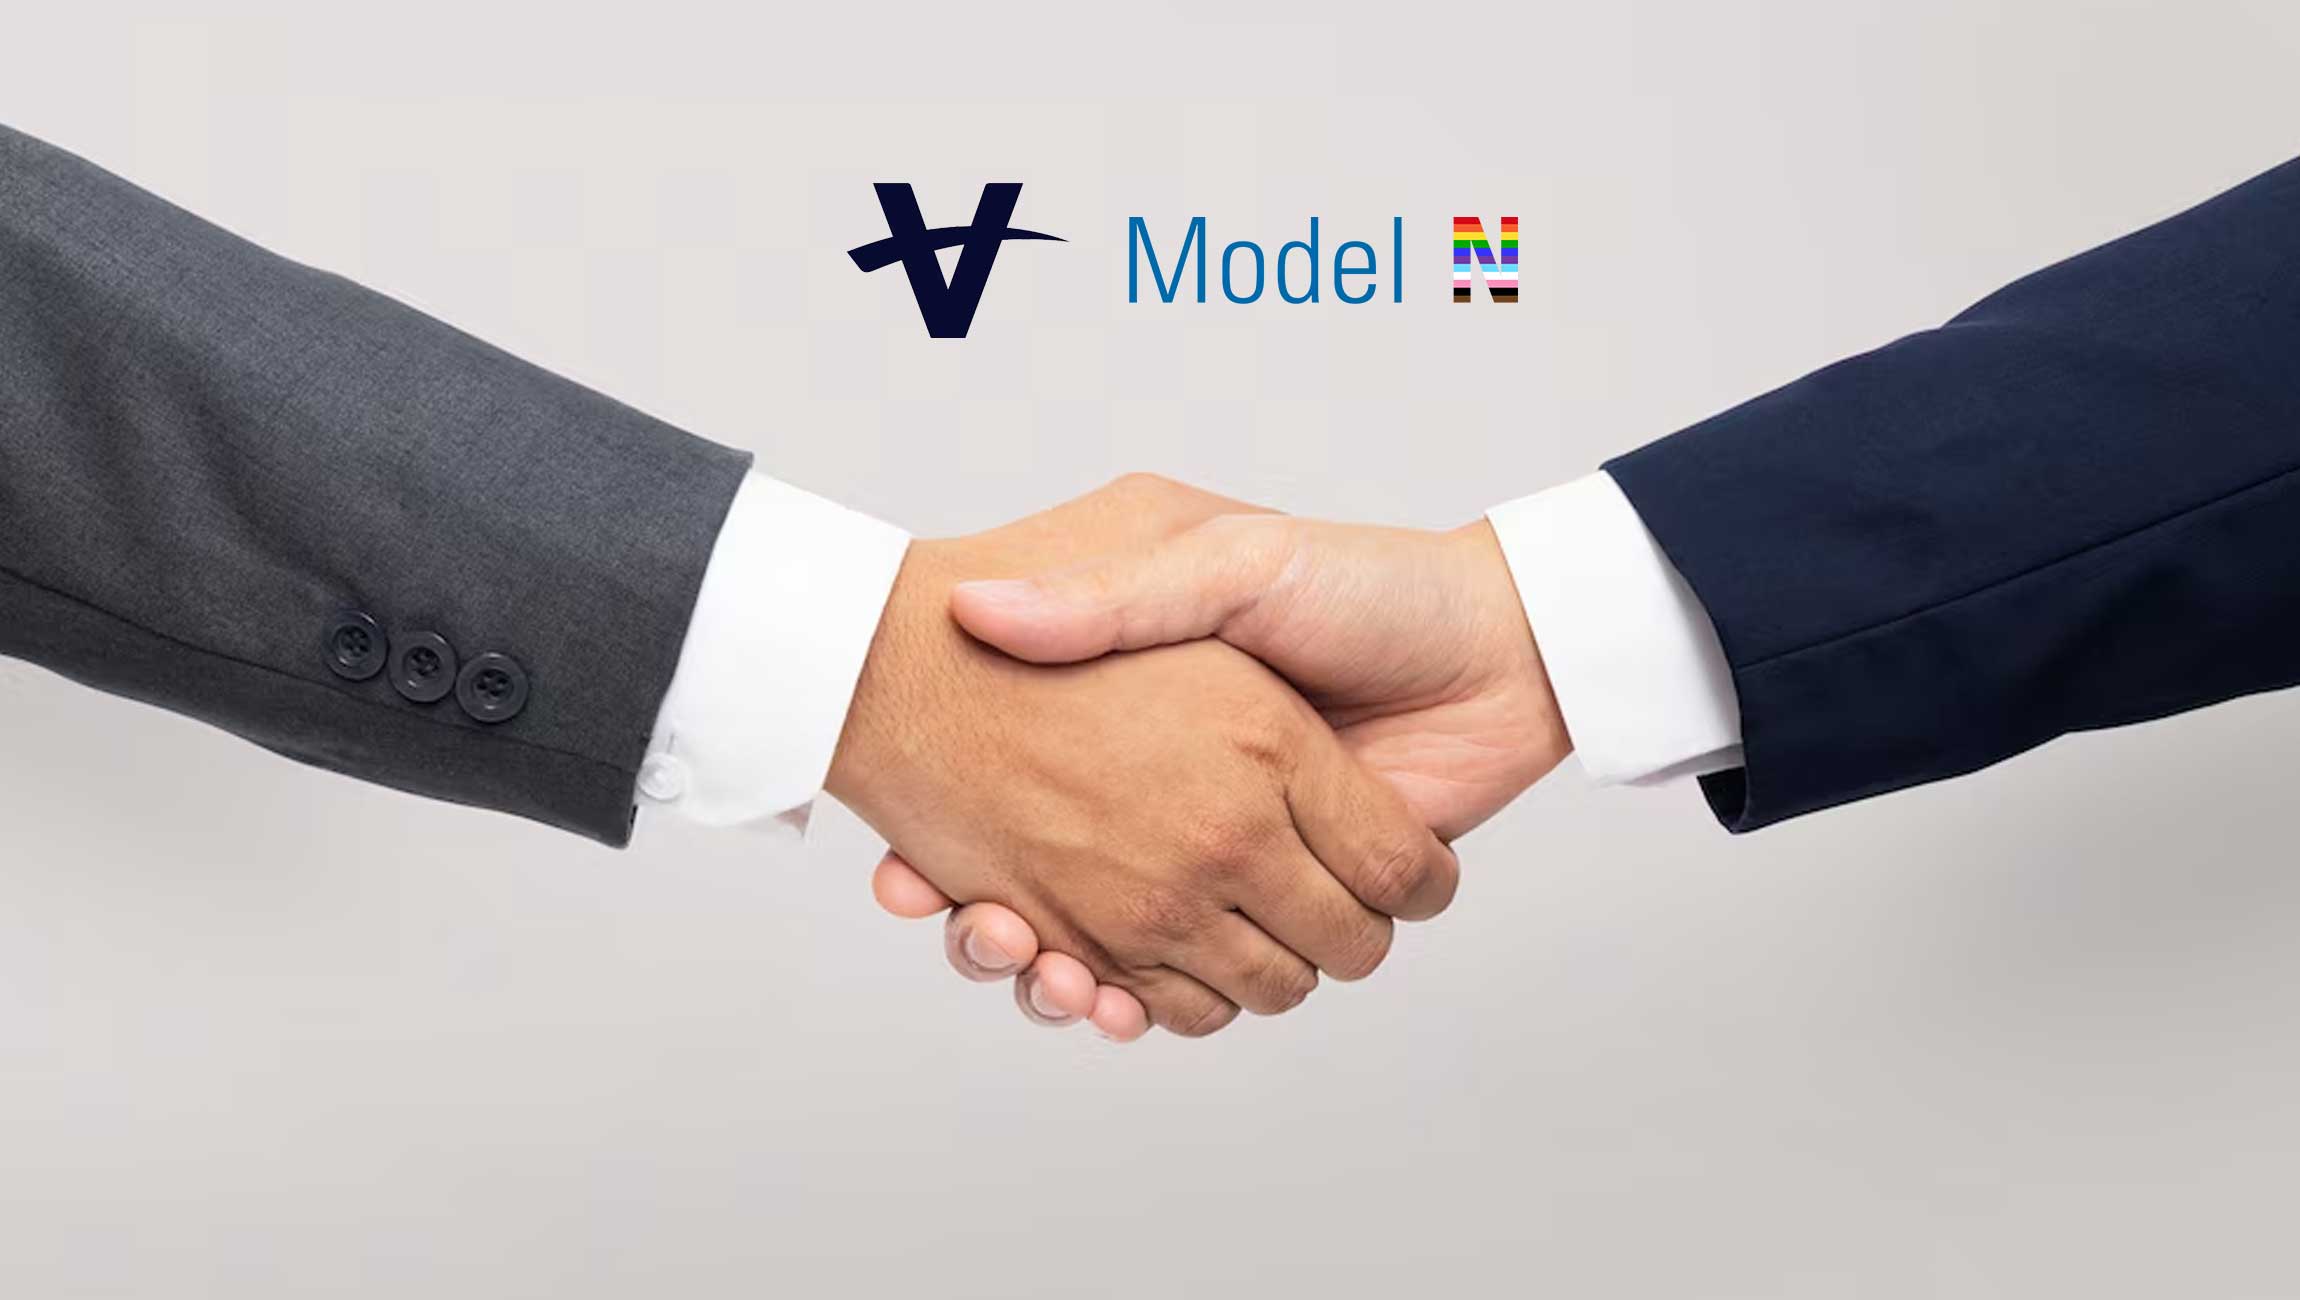 Vista Equity Partners Completes Acquisition of Model N